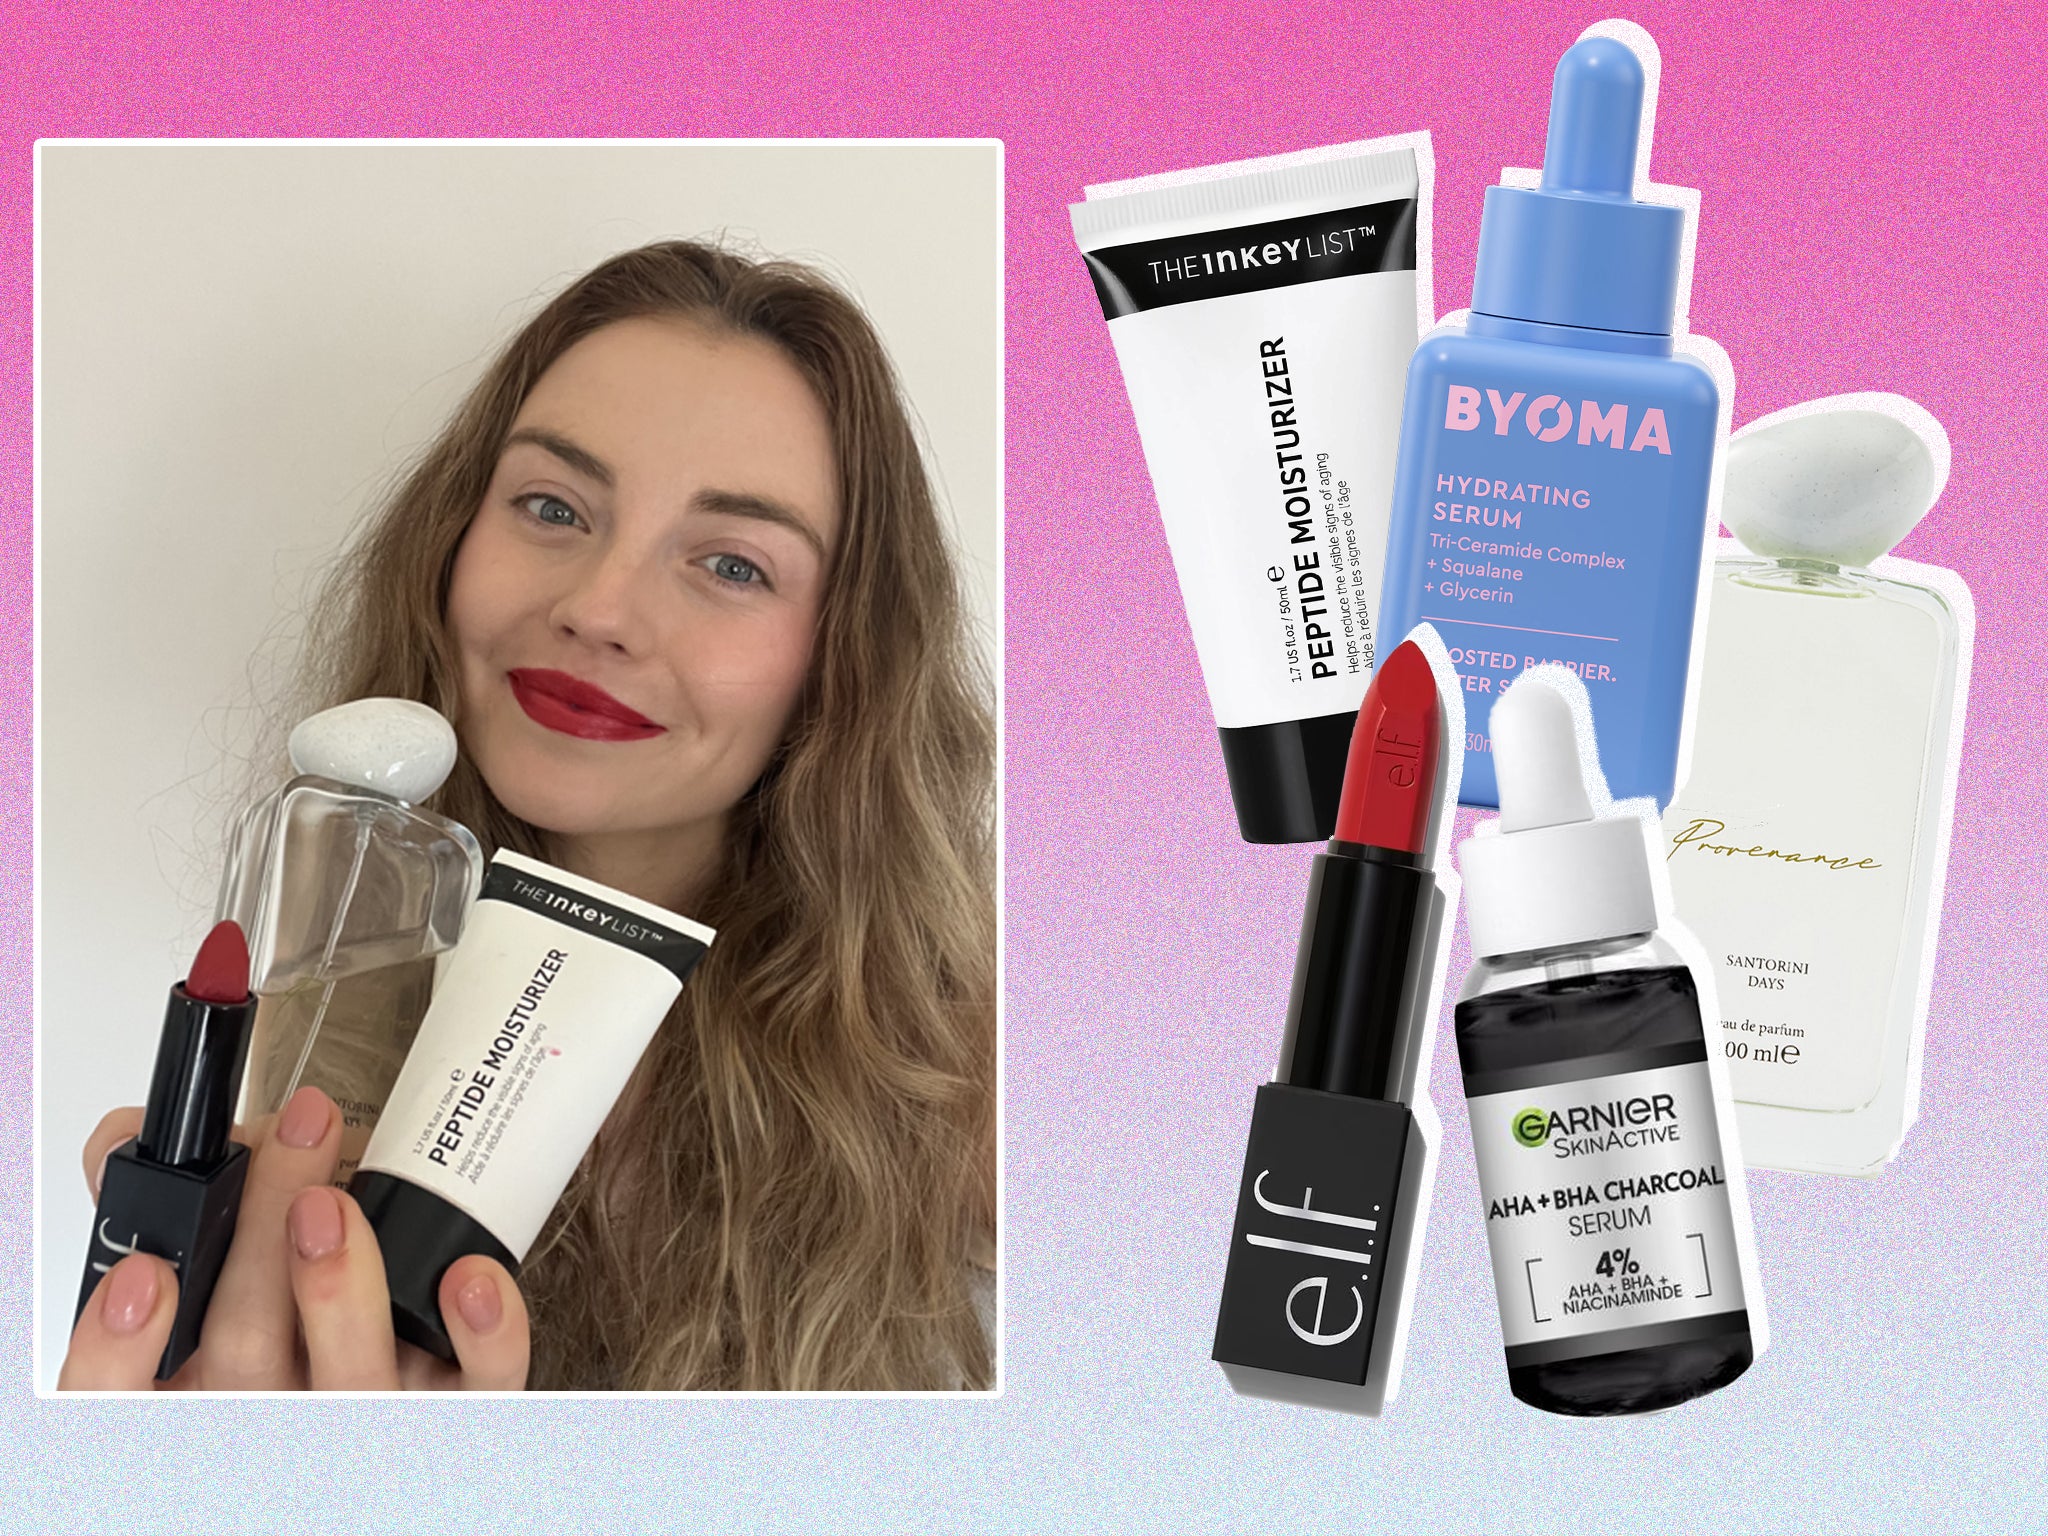 Cheap beauty products under £20: Byoma, Cerave, M&S and more